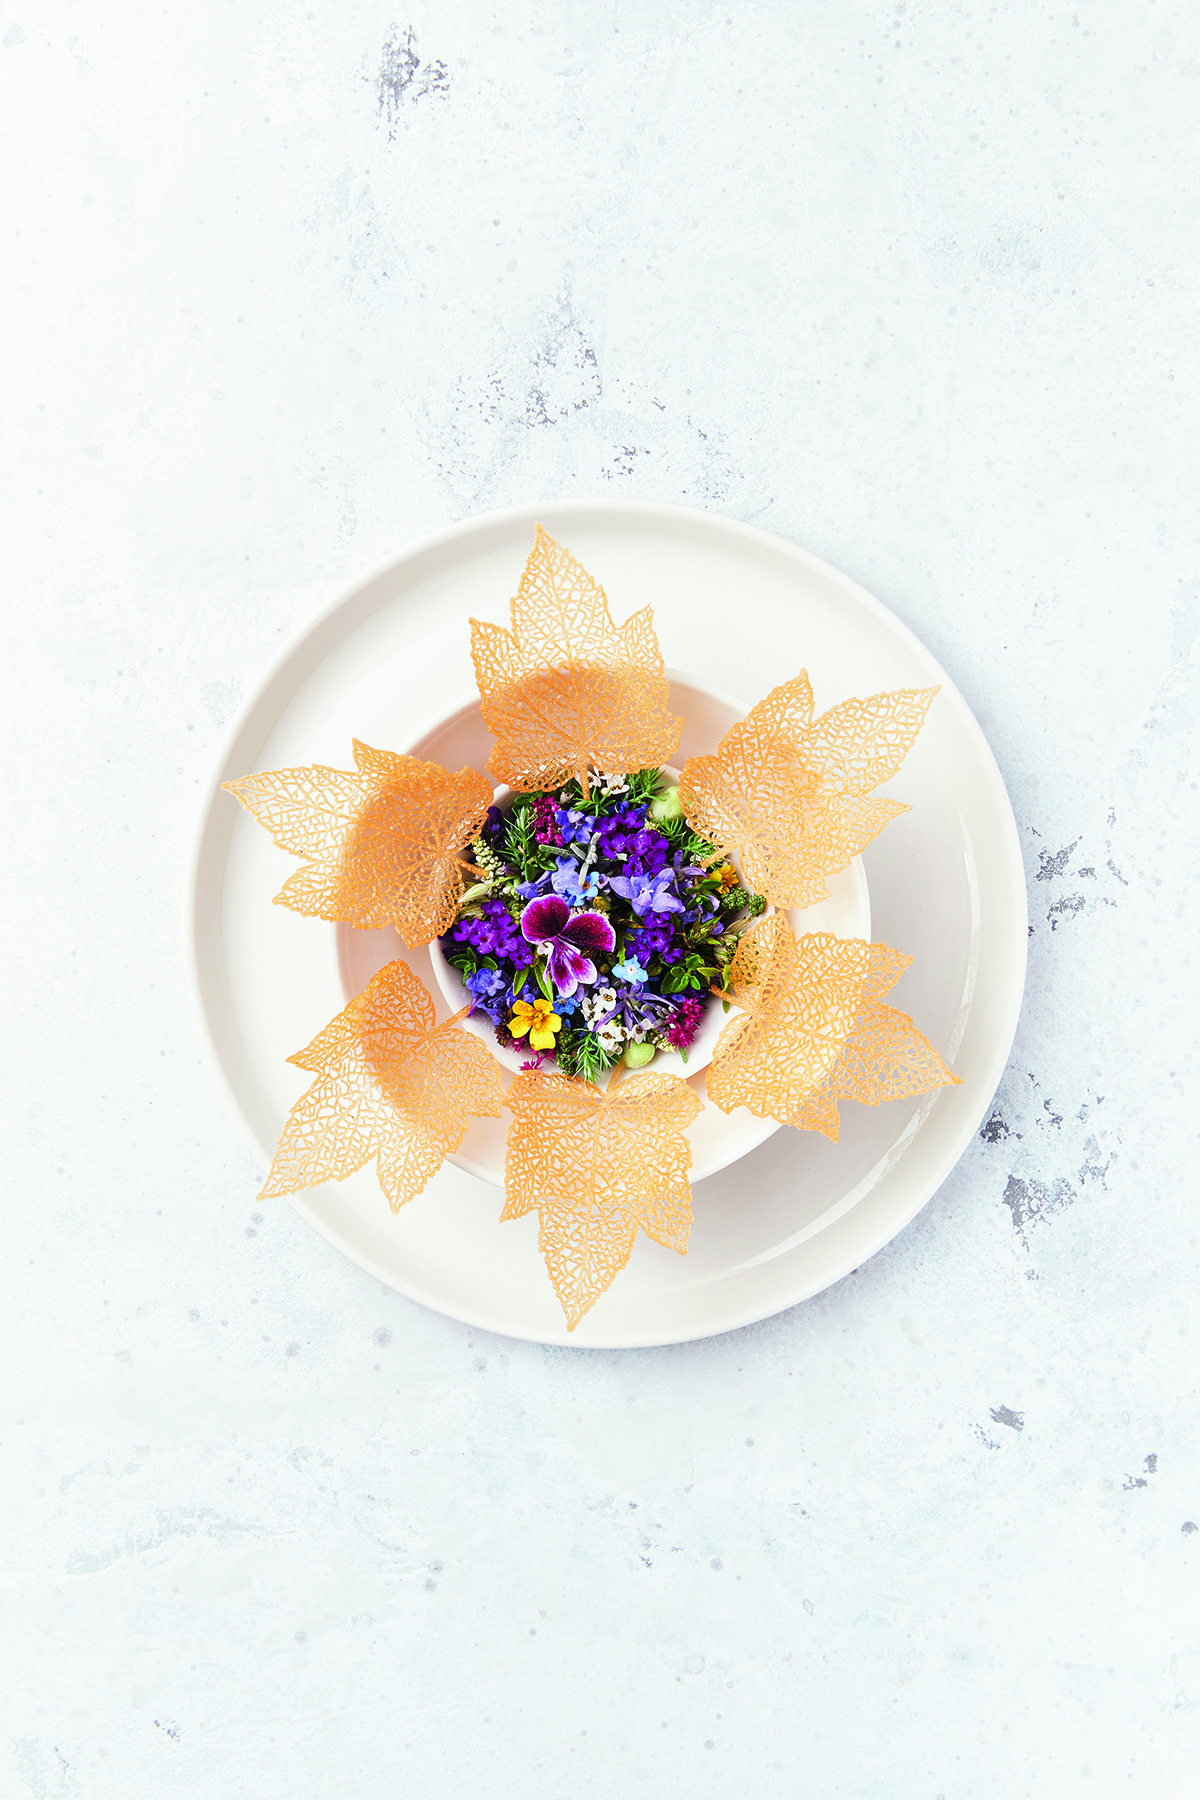 A flower shaped crust on a plate with flower petals in the centre